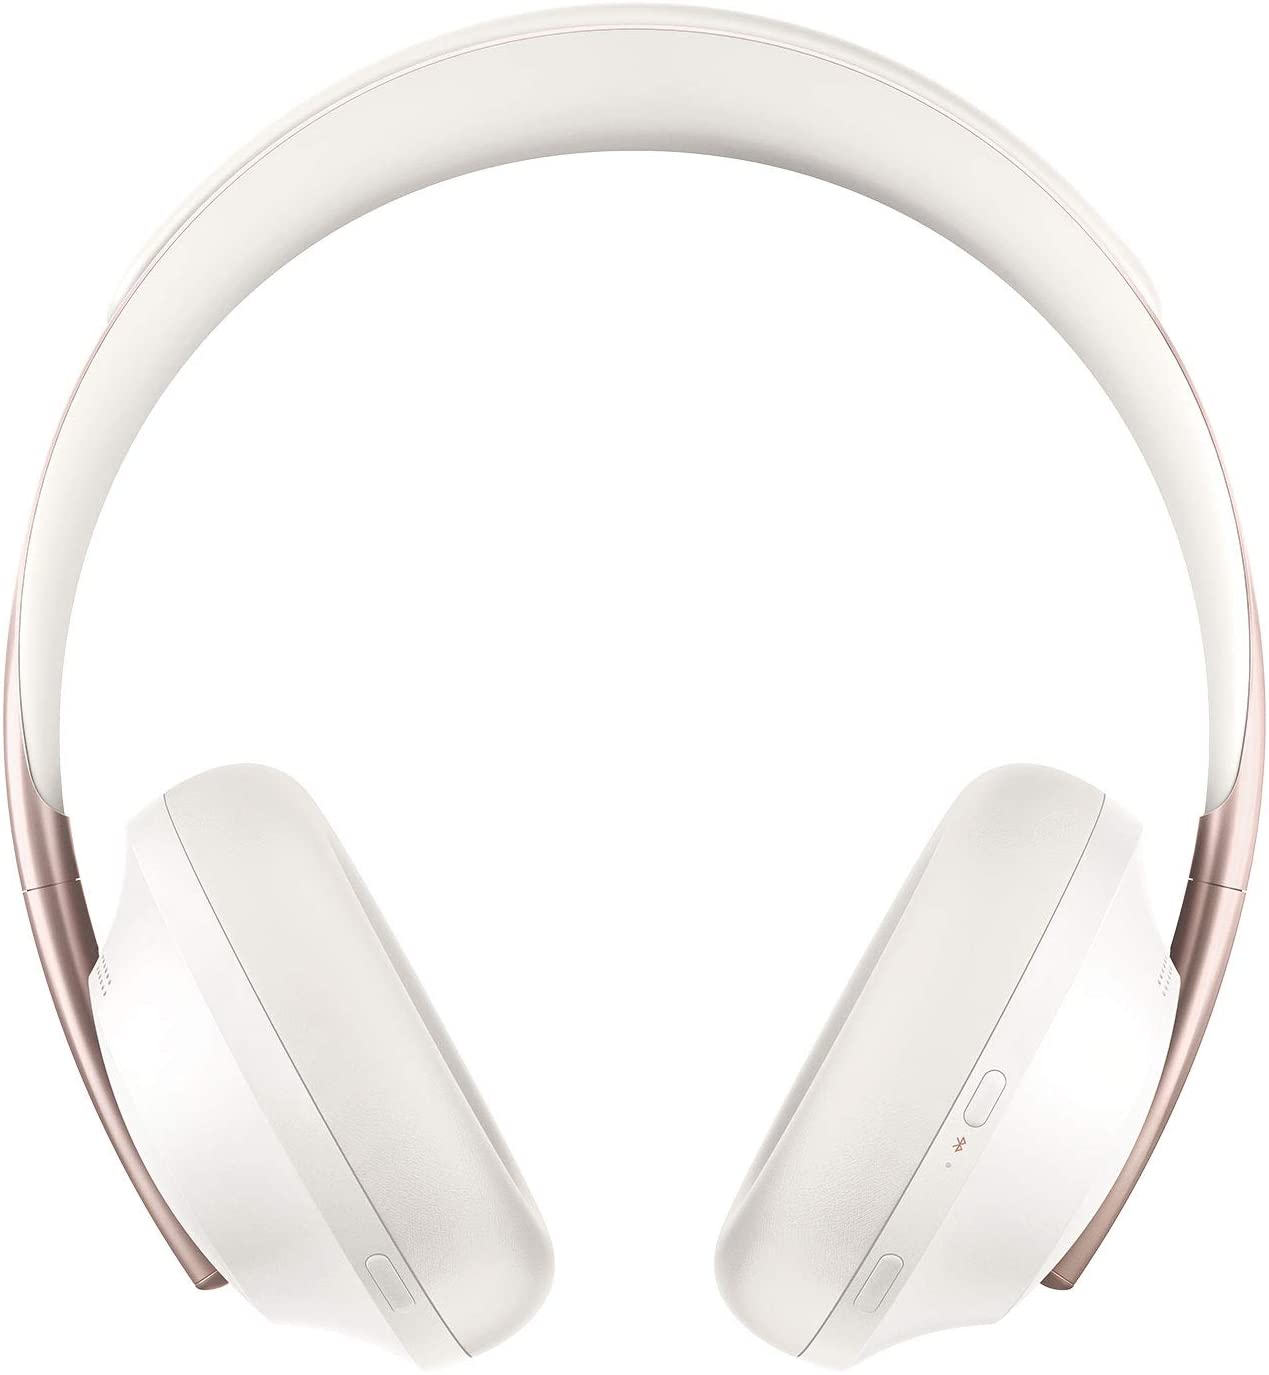 Bose Noise Cancelling Wireless Bluetooth Headphones 700 On Sale for $100 Off [Deal]